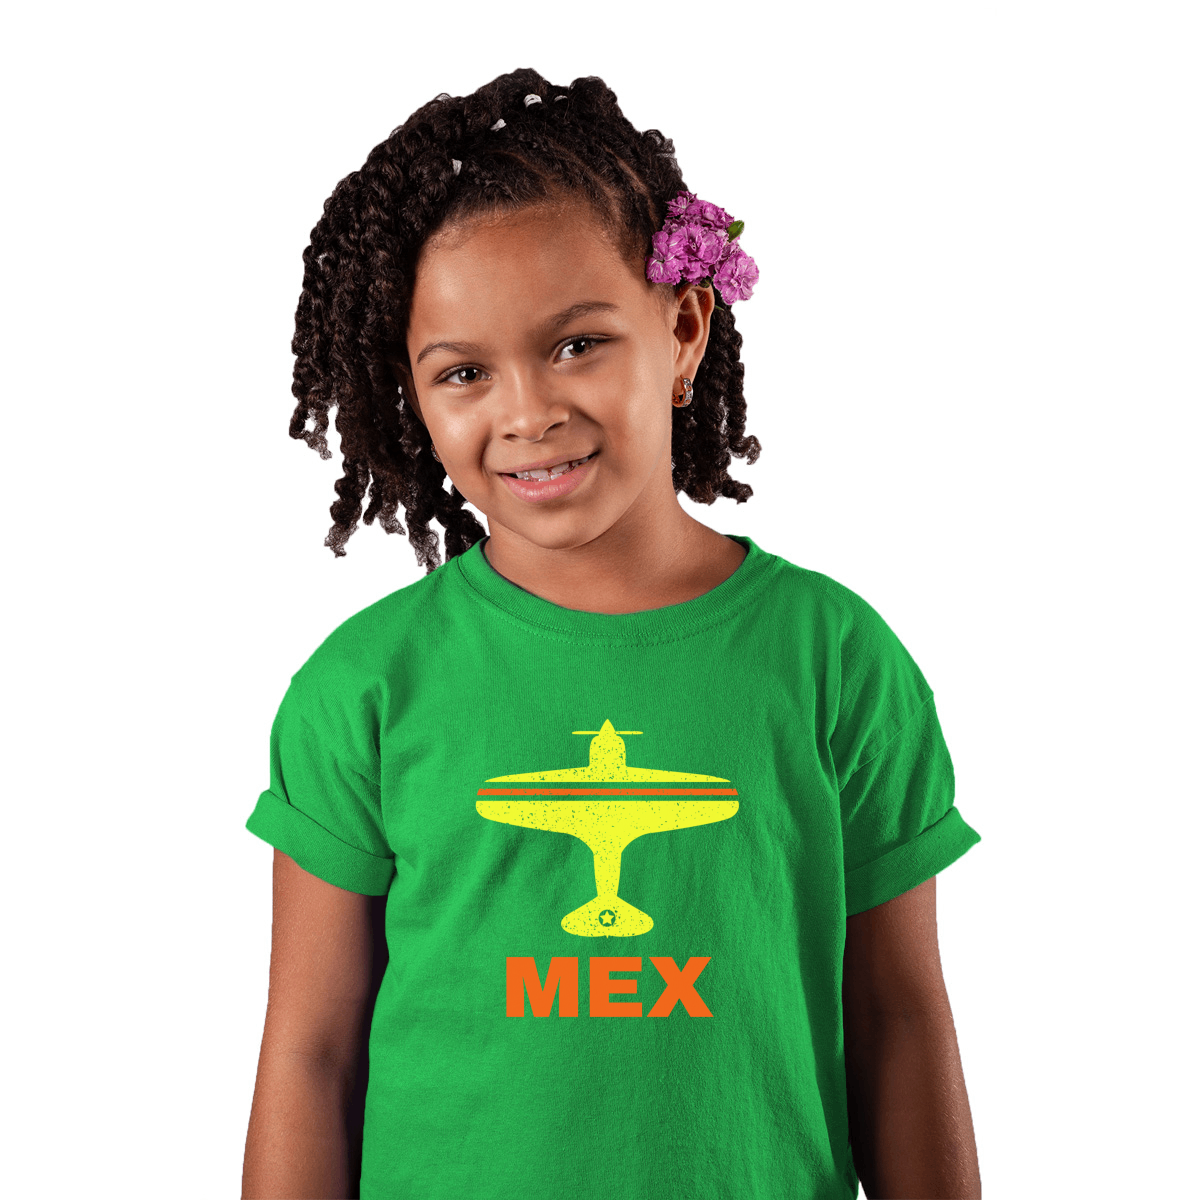 Fly Mexico City MEX Airport  Kids T-shirt | Green